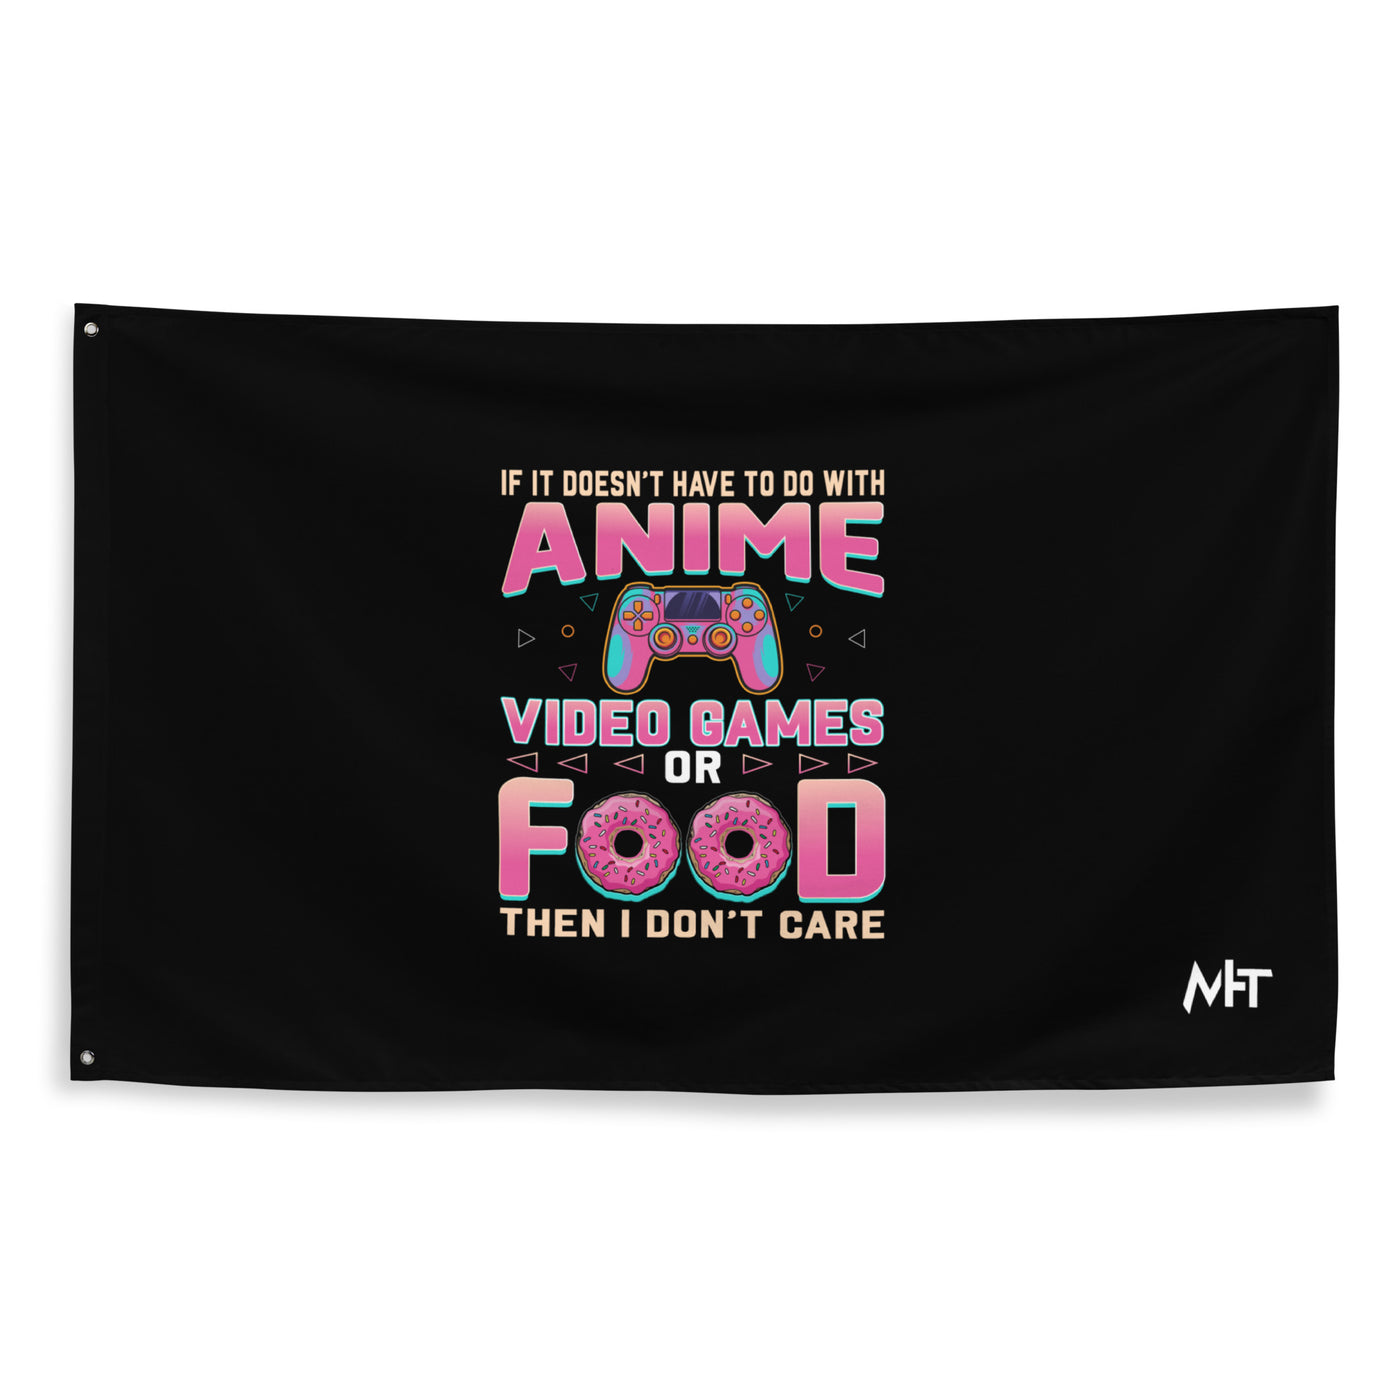 If it doesn't have to do with anime Video game, then I don't care - Flag